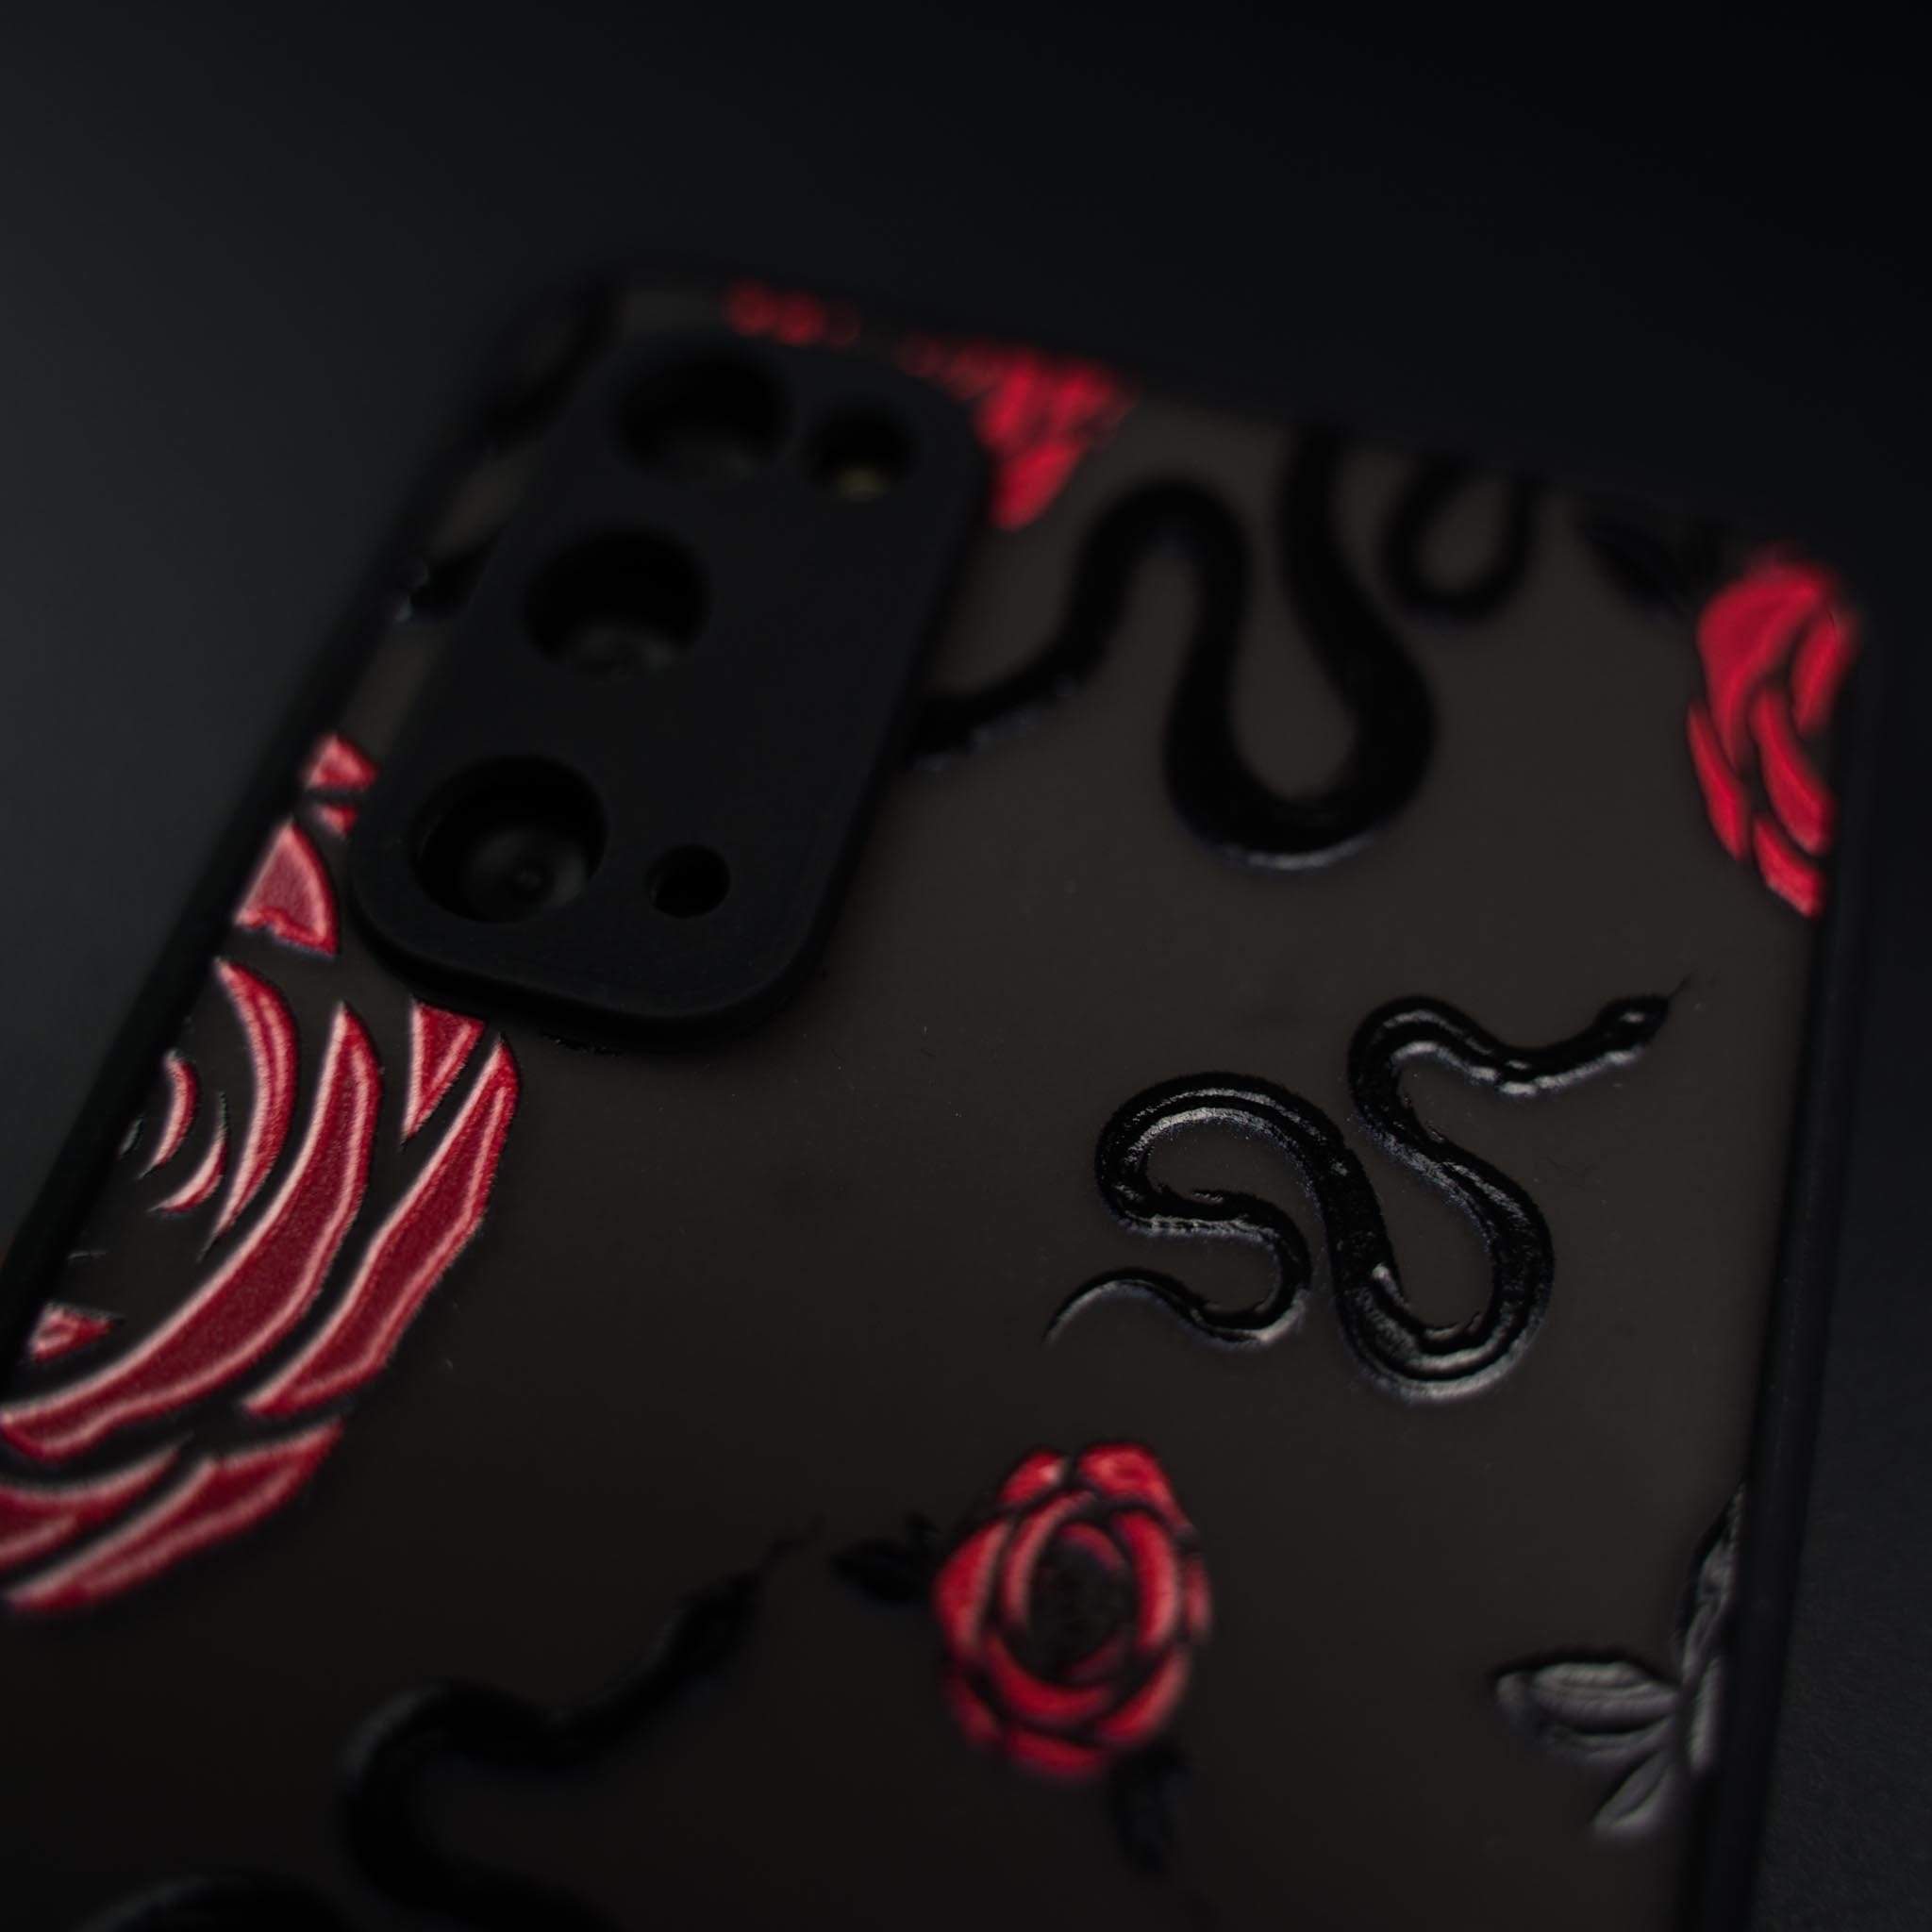 SNAKES & ROSES Tough Android Case